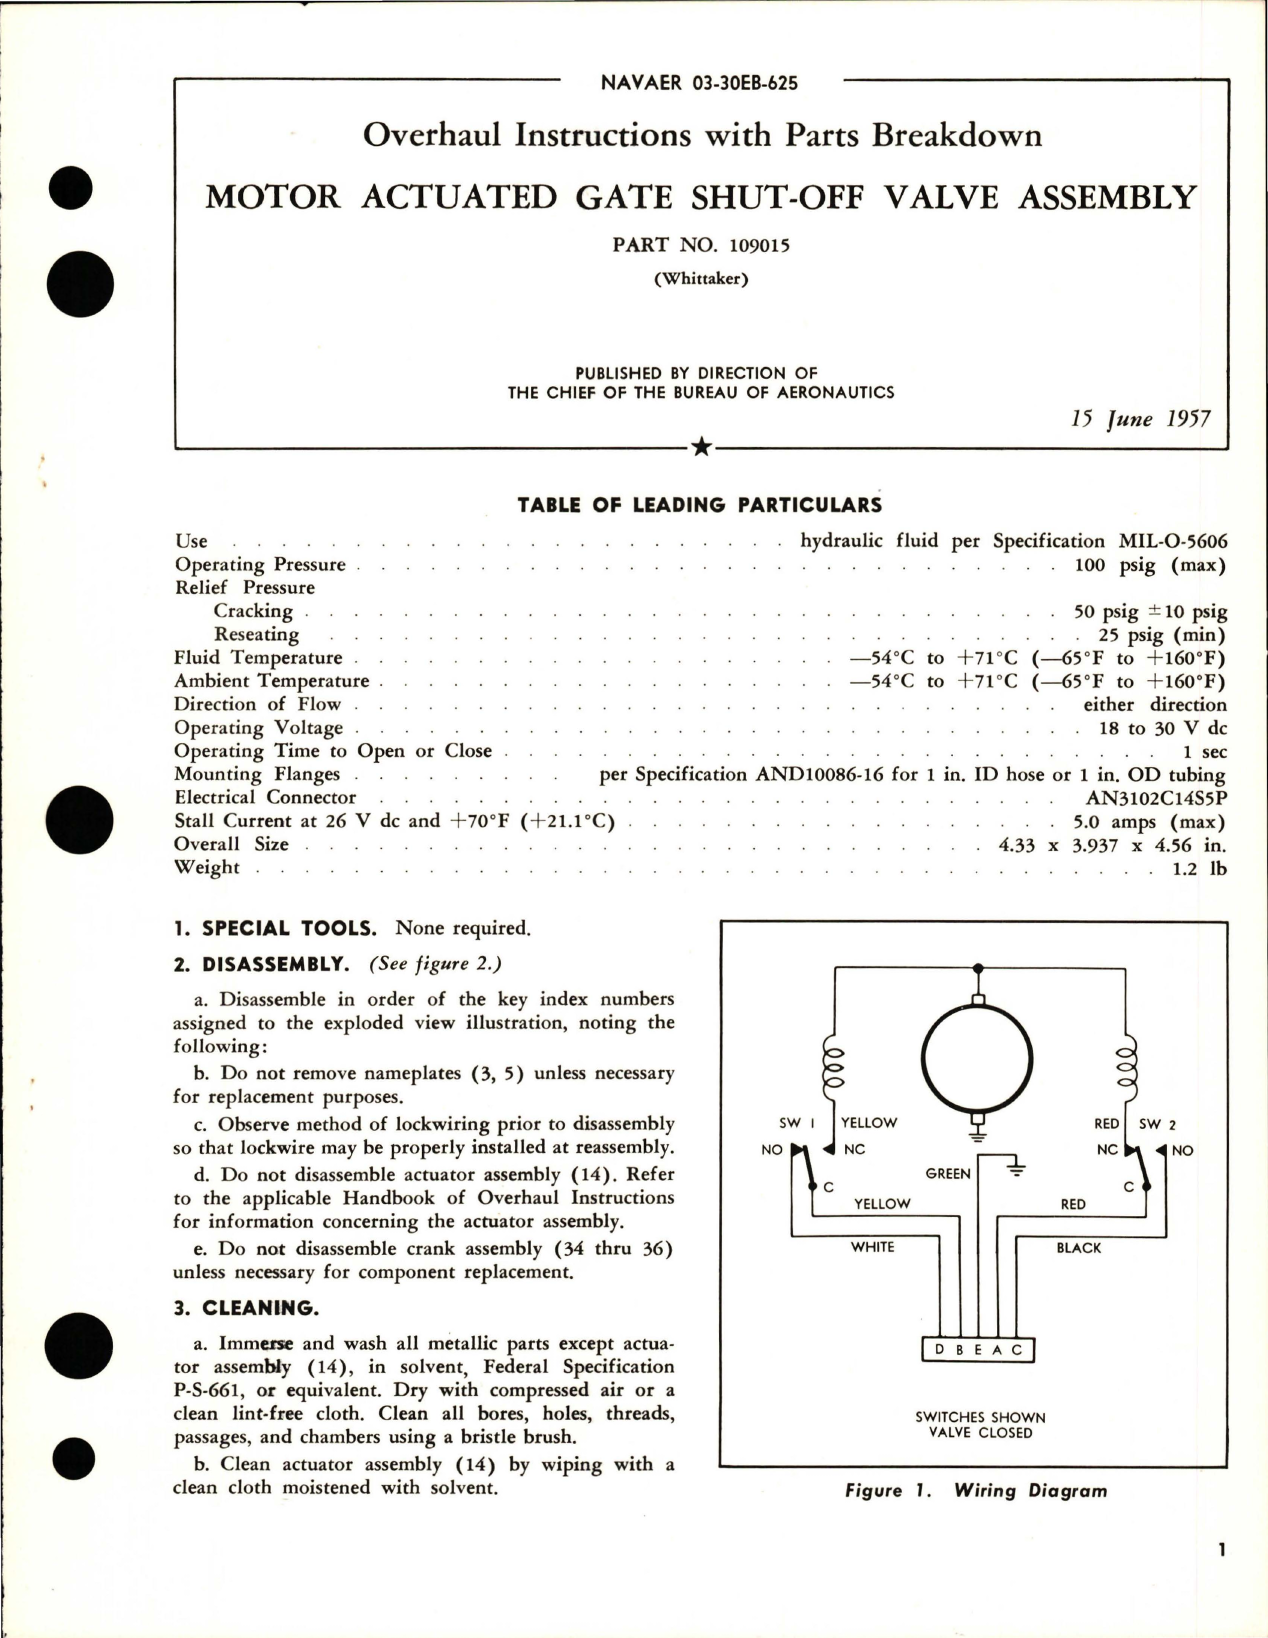 Sample page 1 from AirCorps Library document: Overhaul Instructions with Parts Breakdown for Motor Actuated Gate Shut-Off Valve Assembly - Part 109015 